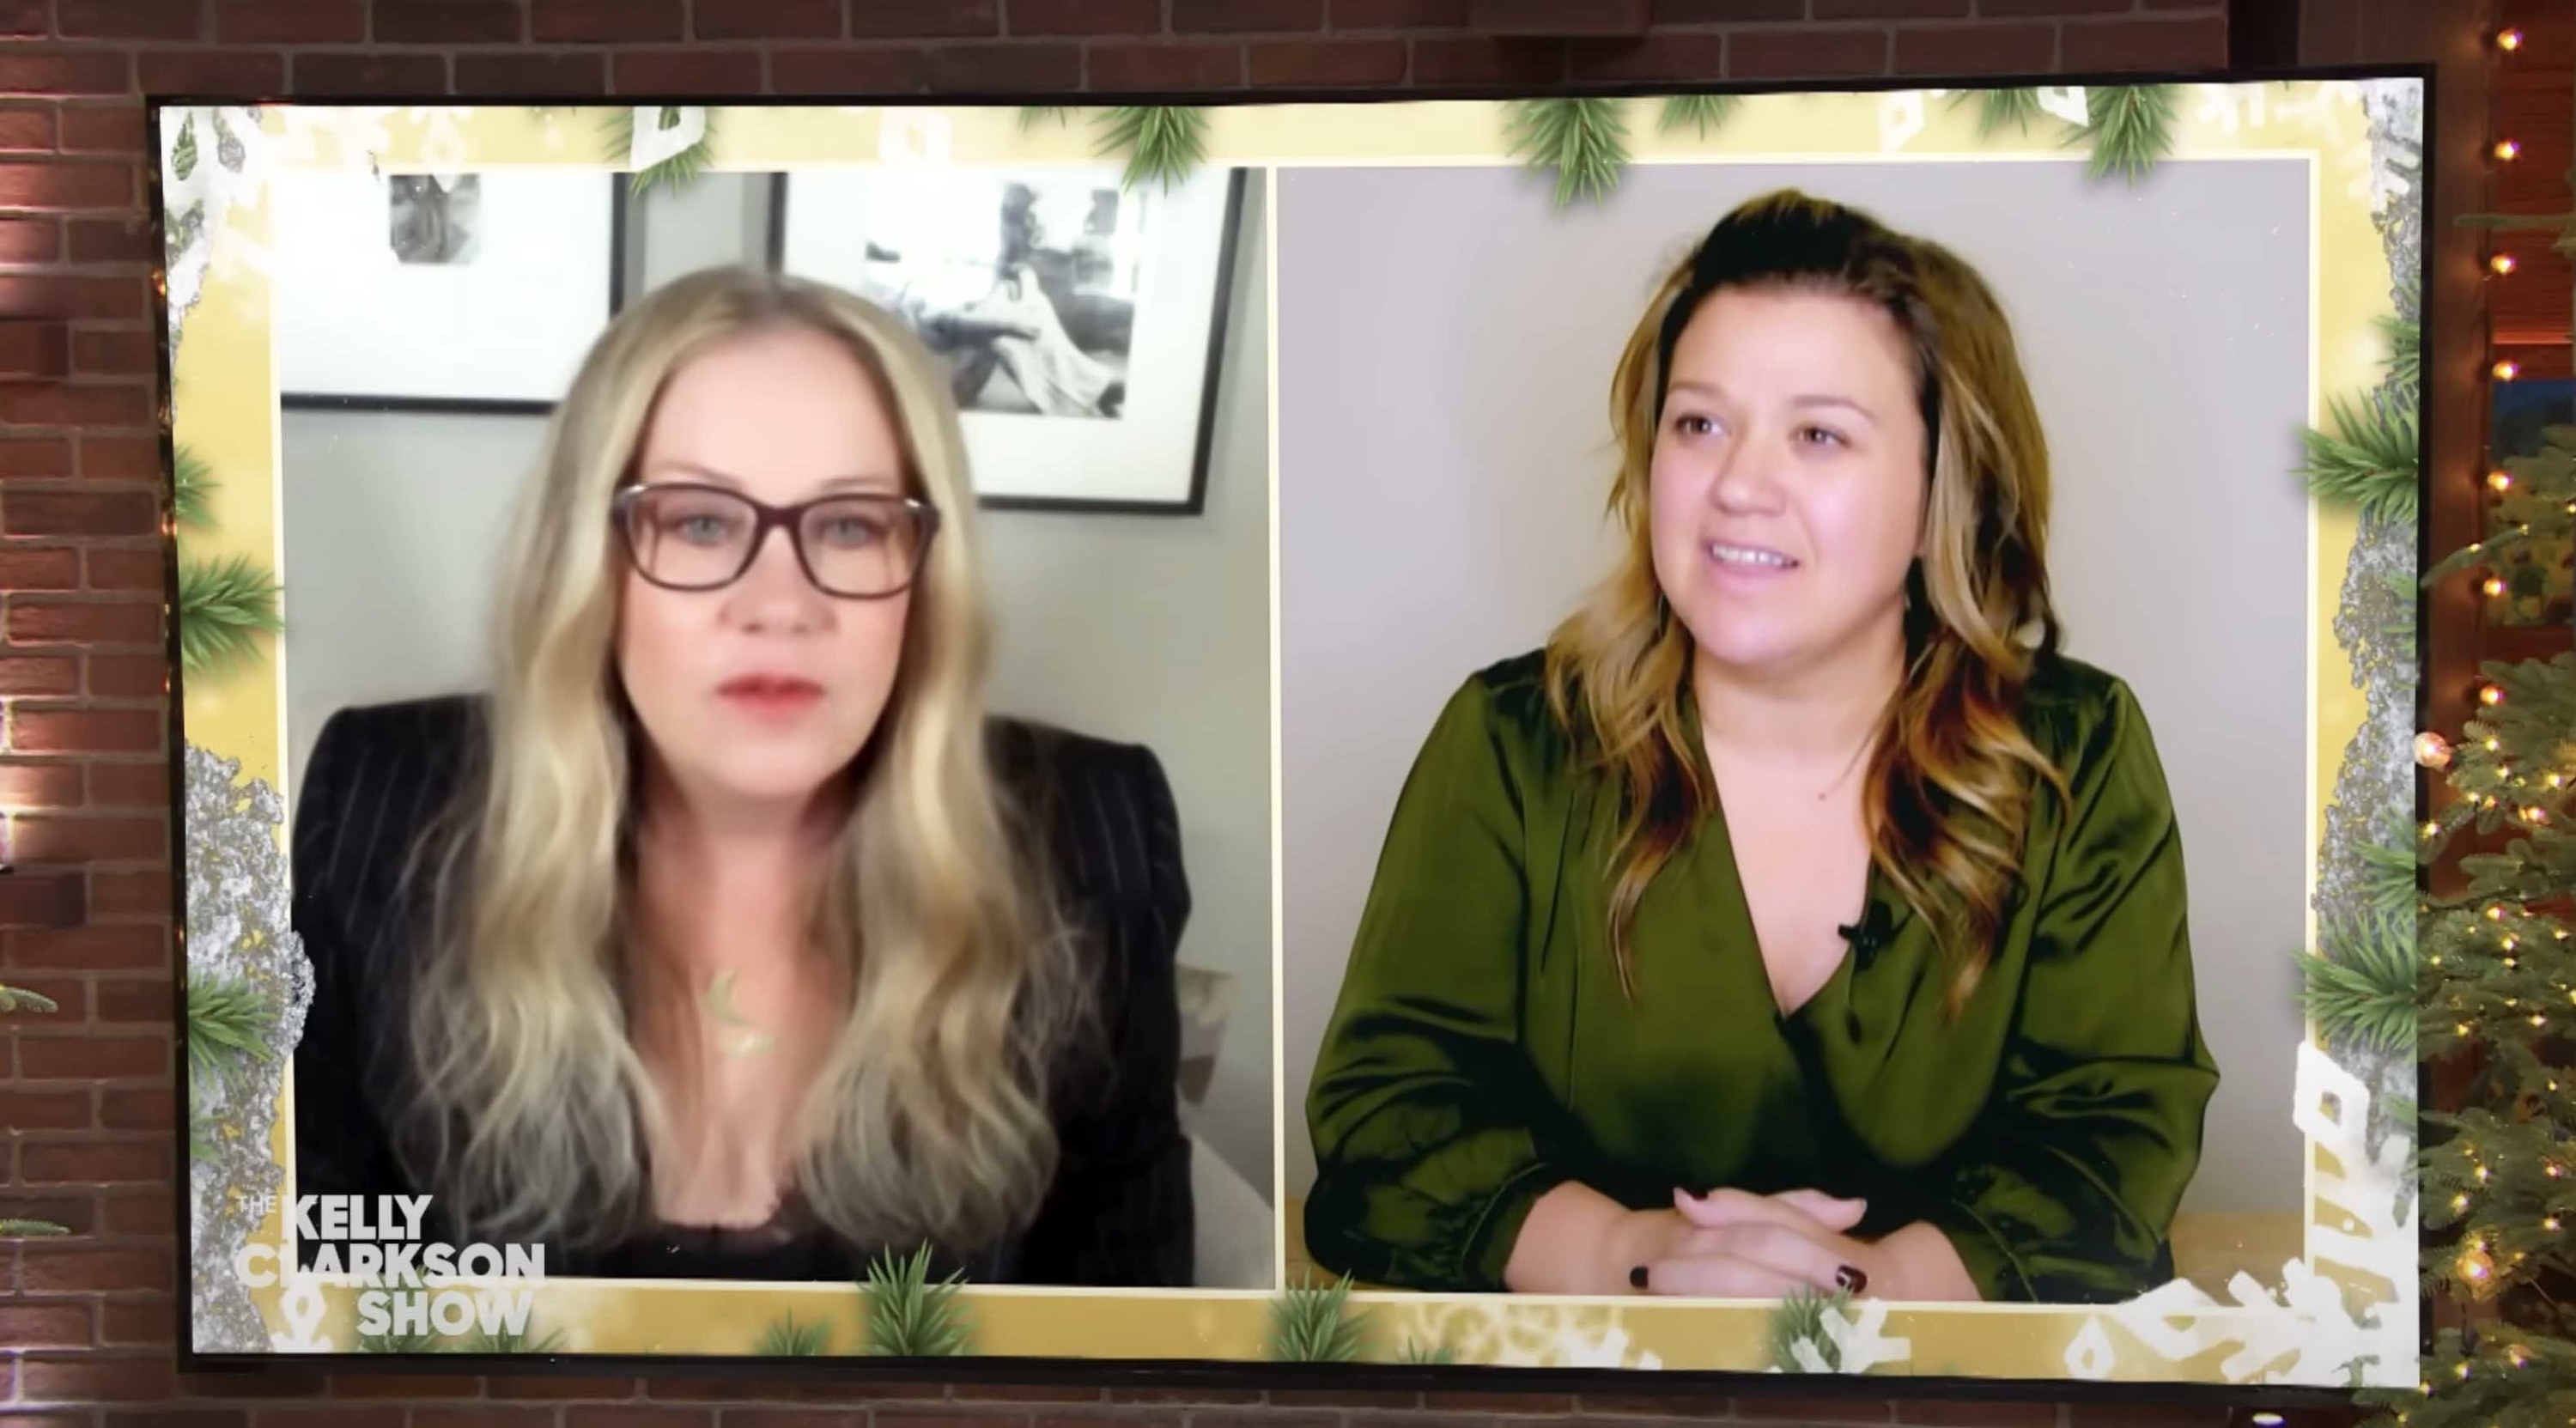 Christina and Kelly talking on the show via video